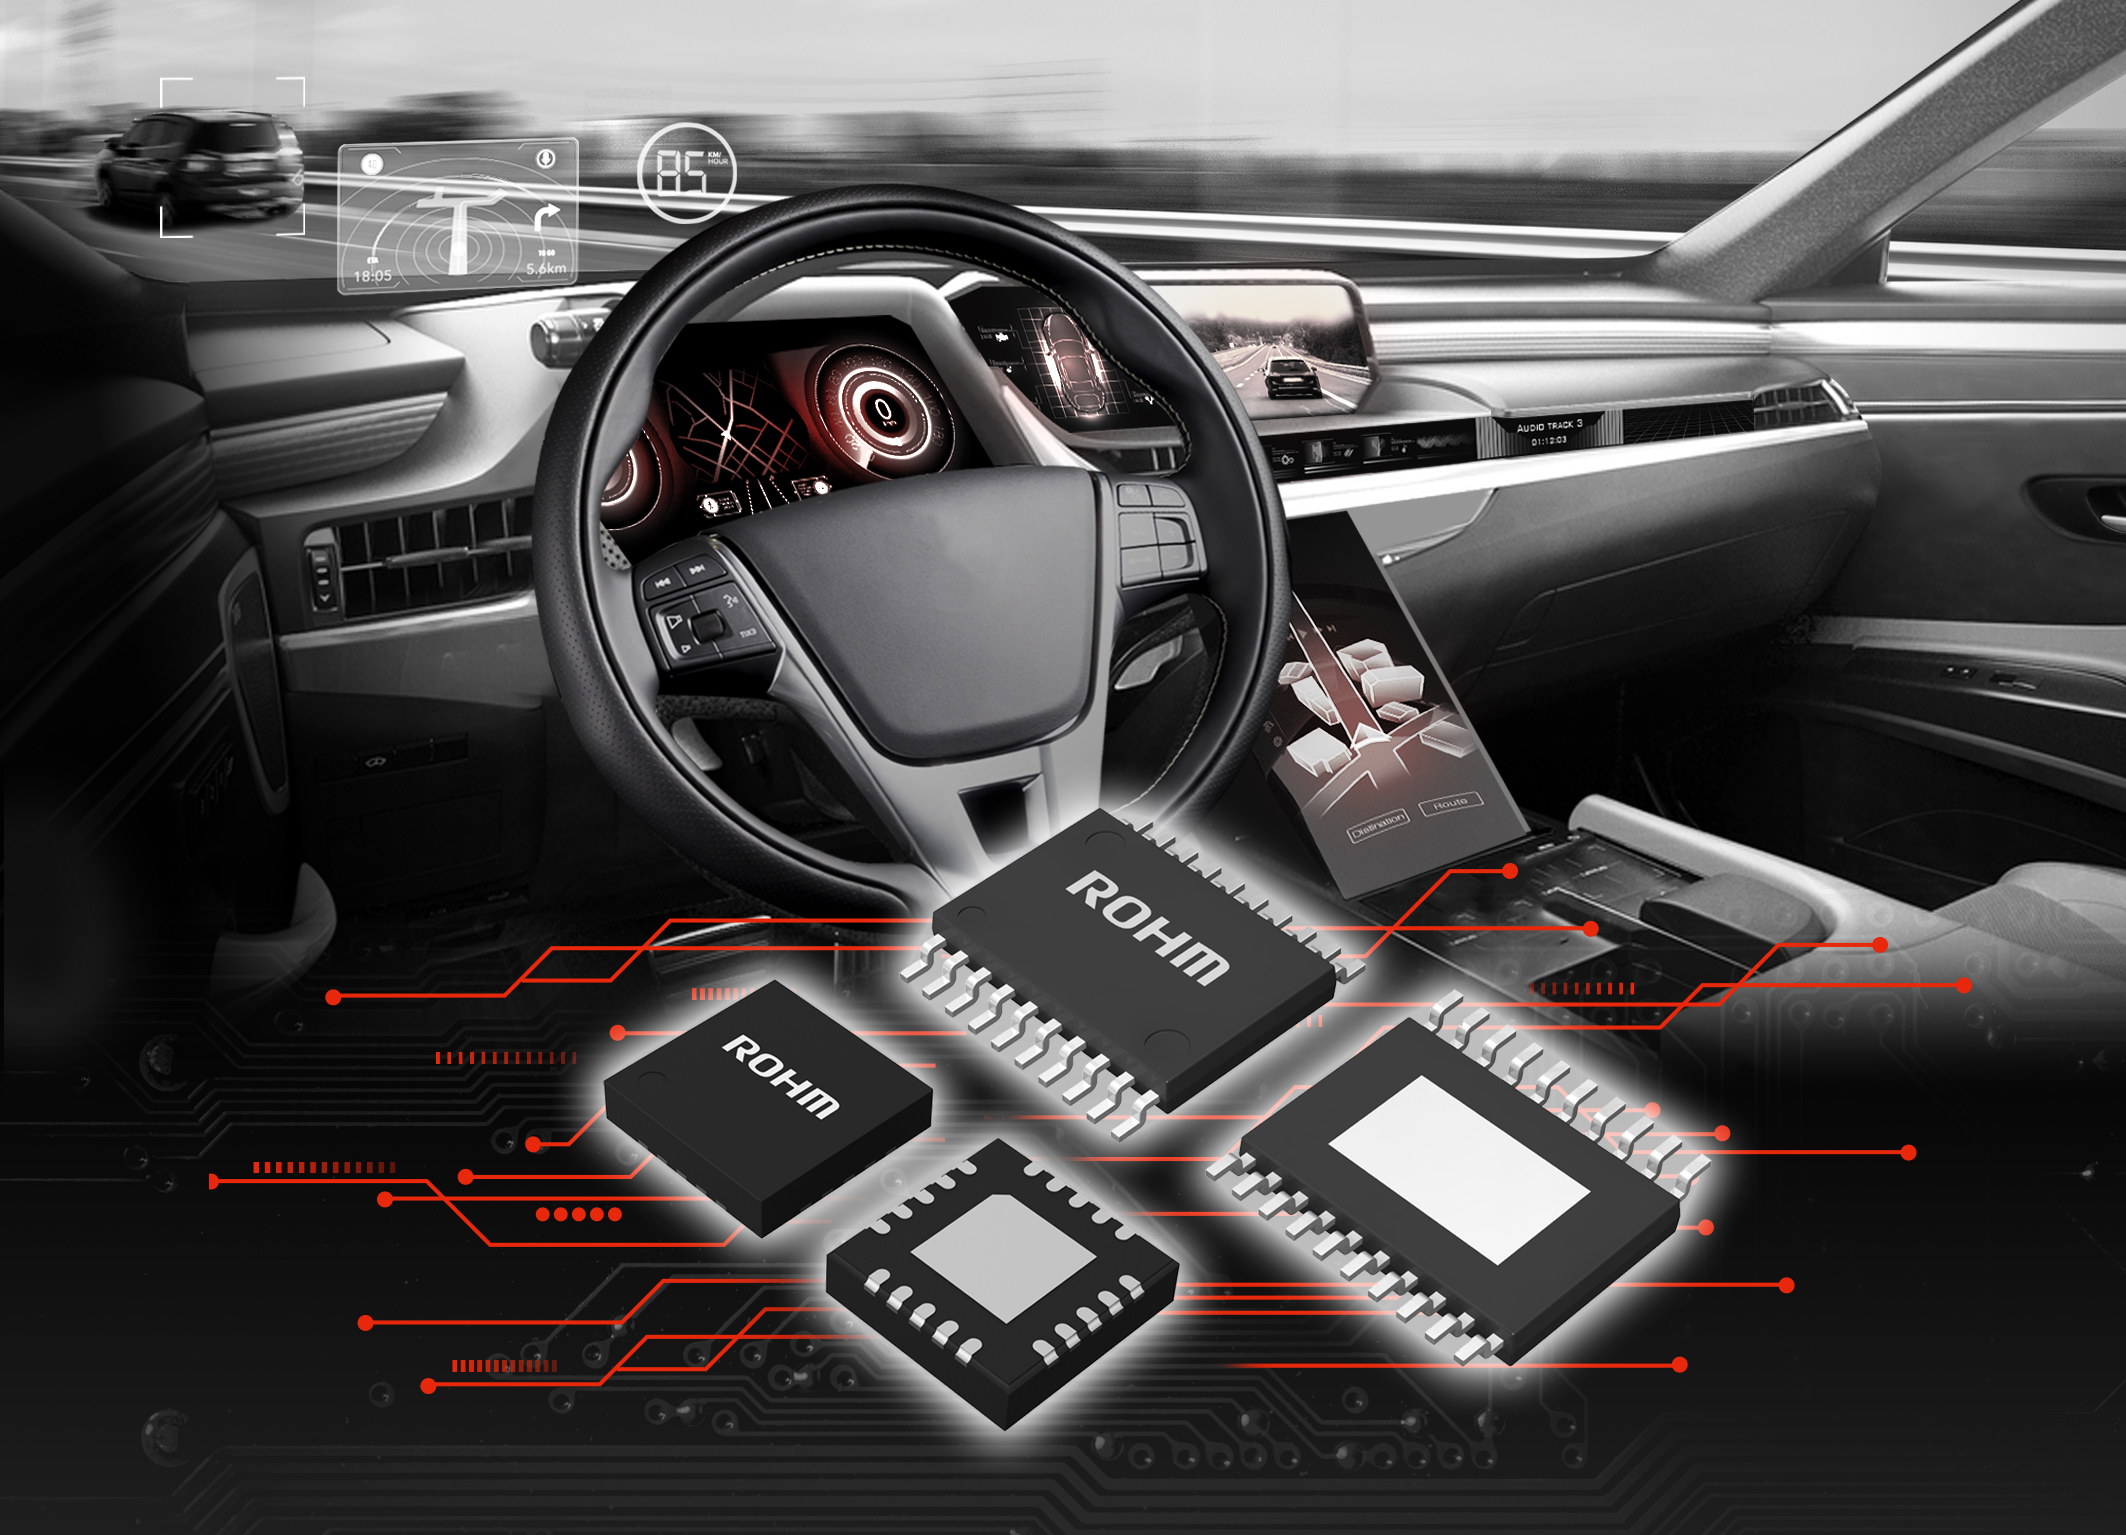 Automotive Primary DC/DC Converters Offer Stable Output